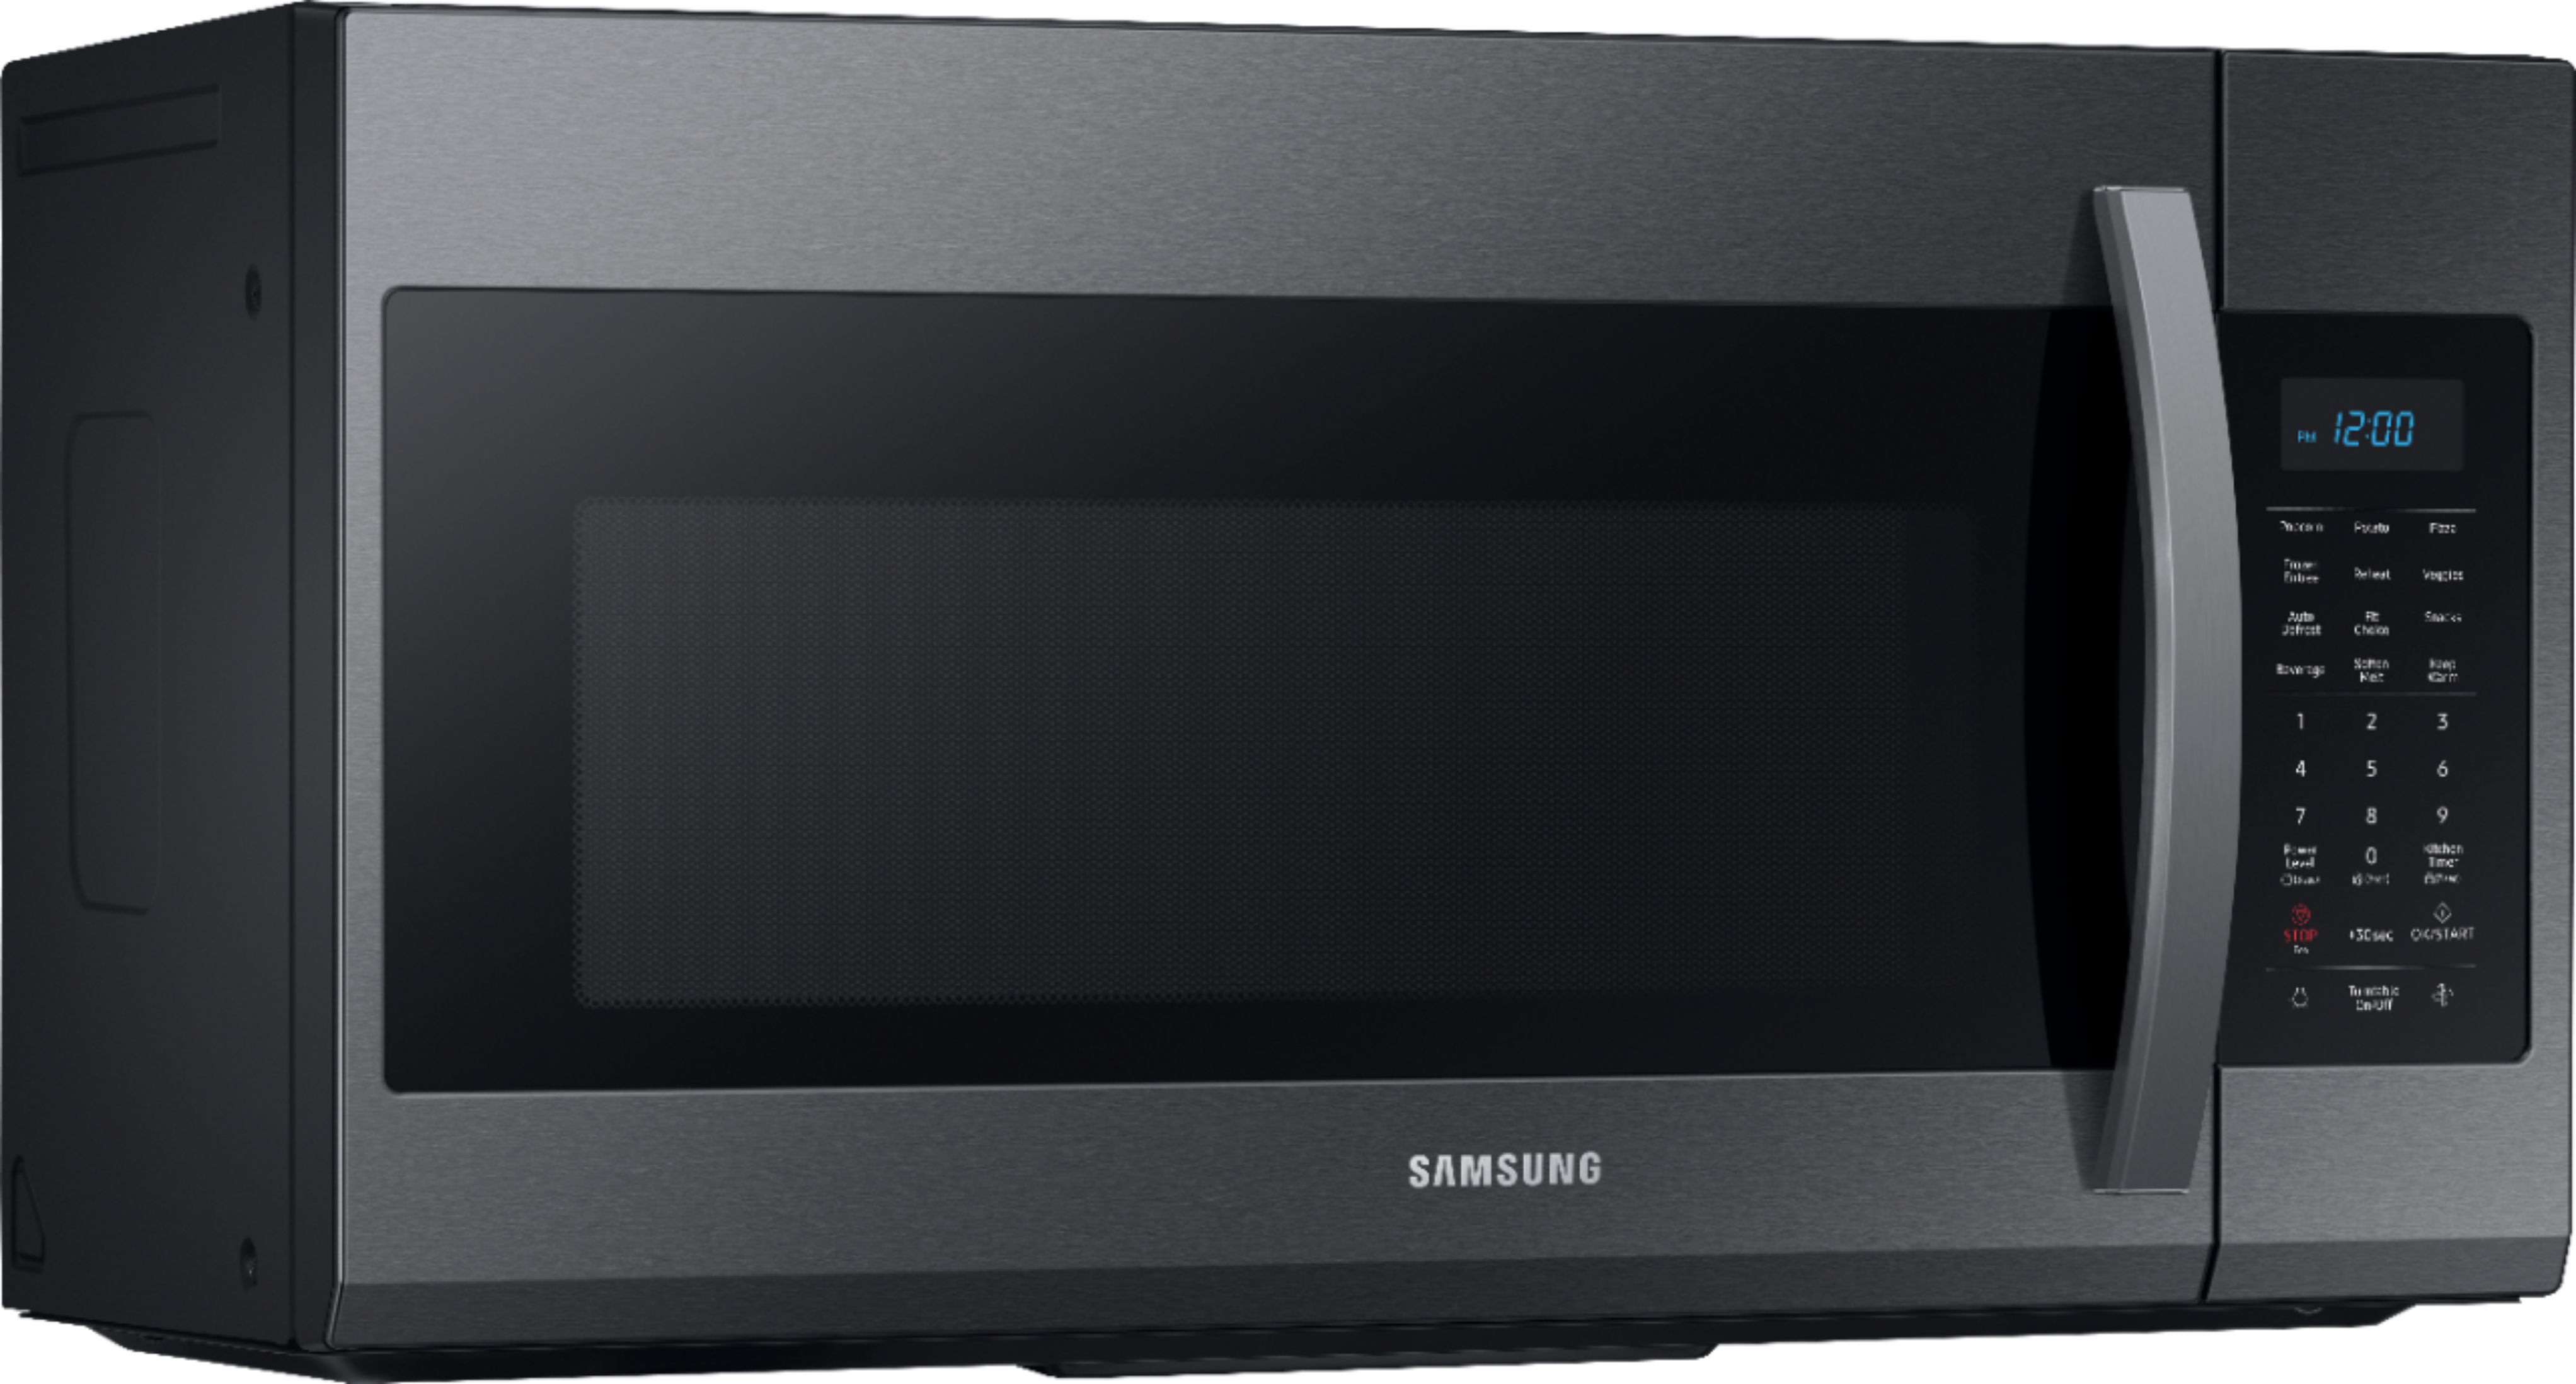 Angle View: Samsung - 1.9 Cu. Ft.  Over-the-Range Microwave with Sensor Cook - Black Stainless Steel